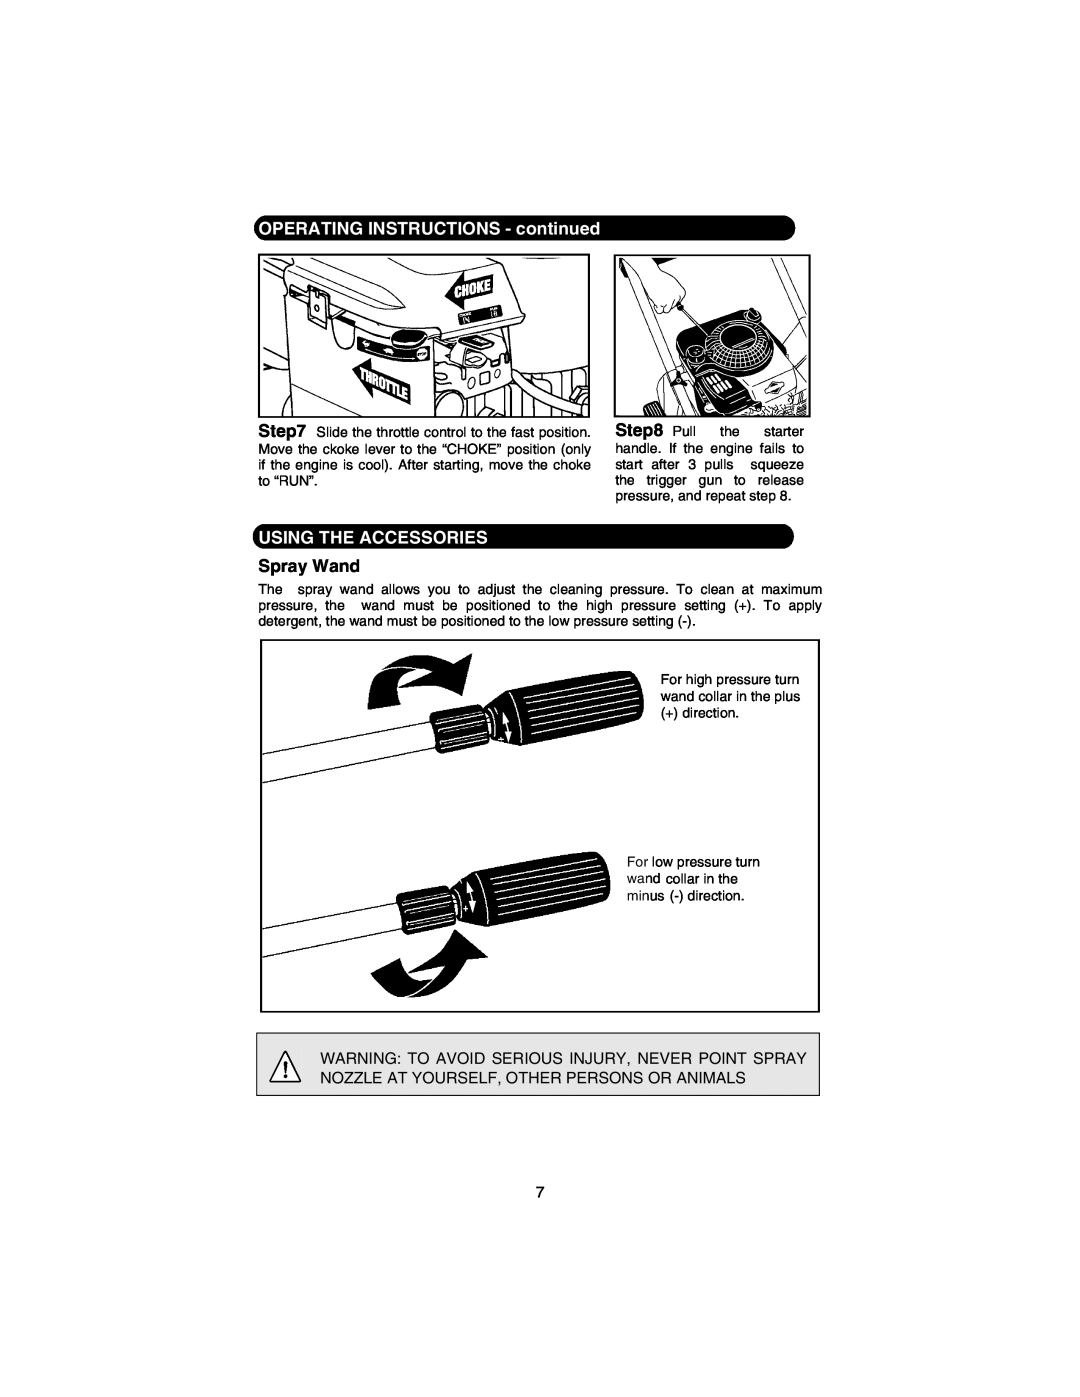 Cub Cadet 2200H manual OPERATING INSTRUCTIONS - continued, Using The Accessories, Spray Wand 